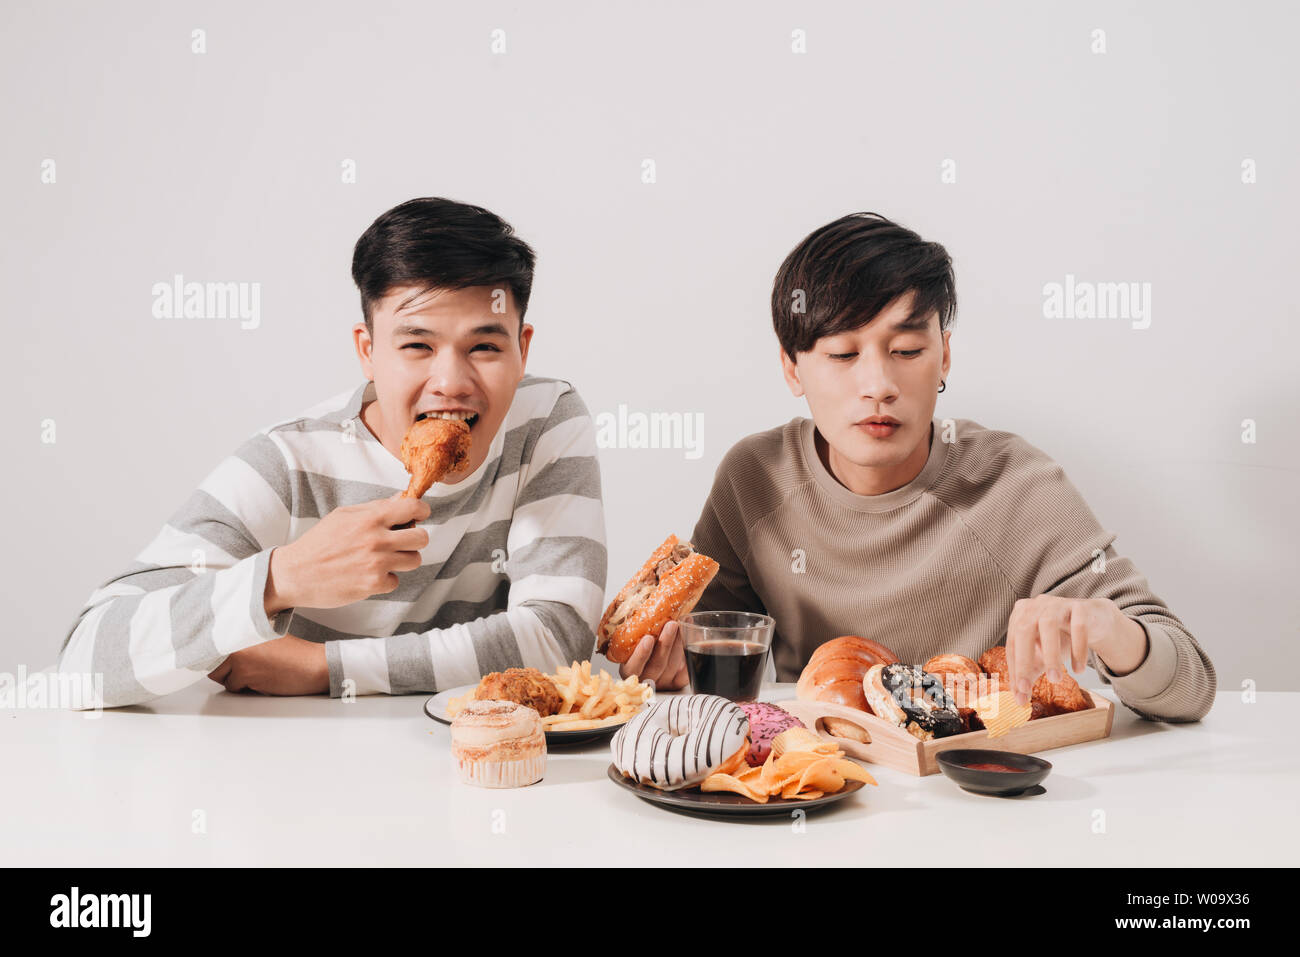 Two friends eating burgers. french fries, having fun and smiling Stock Photo